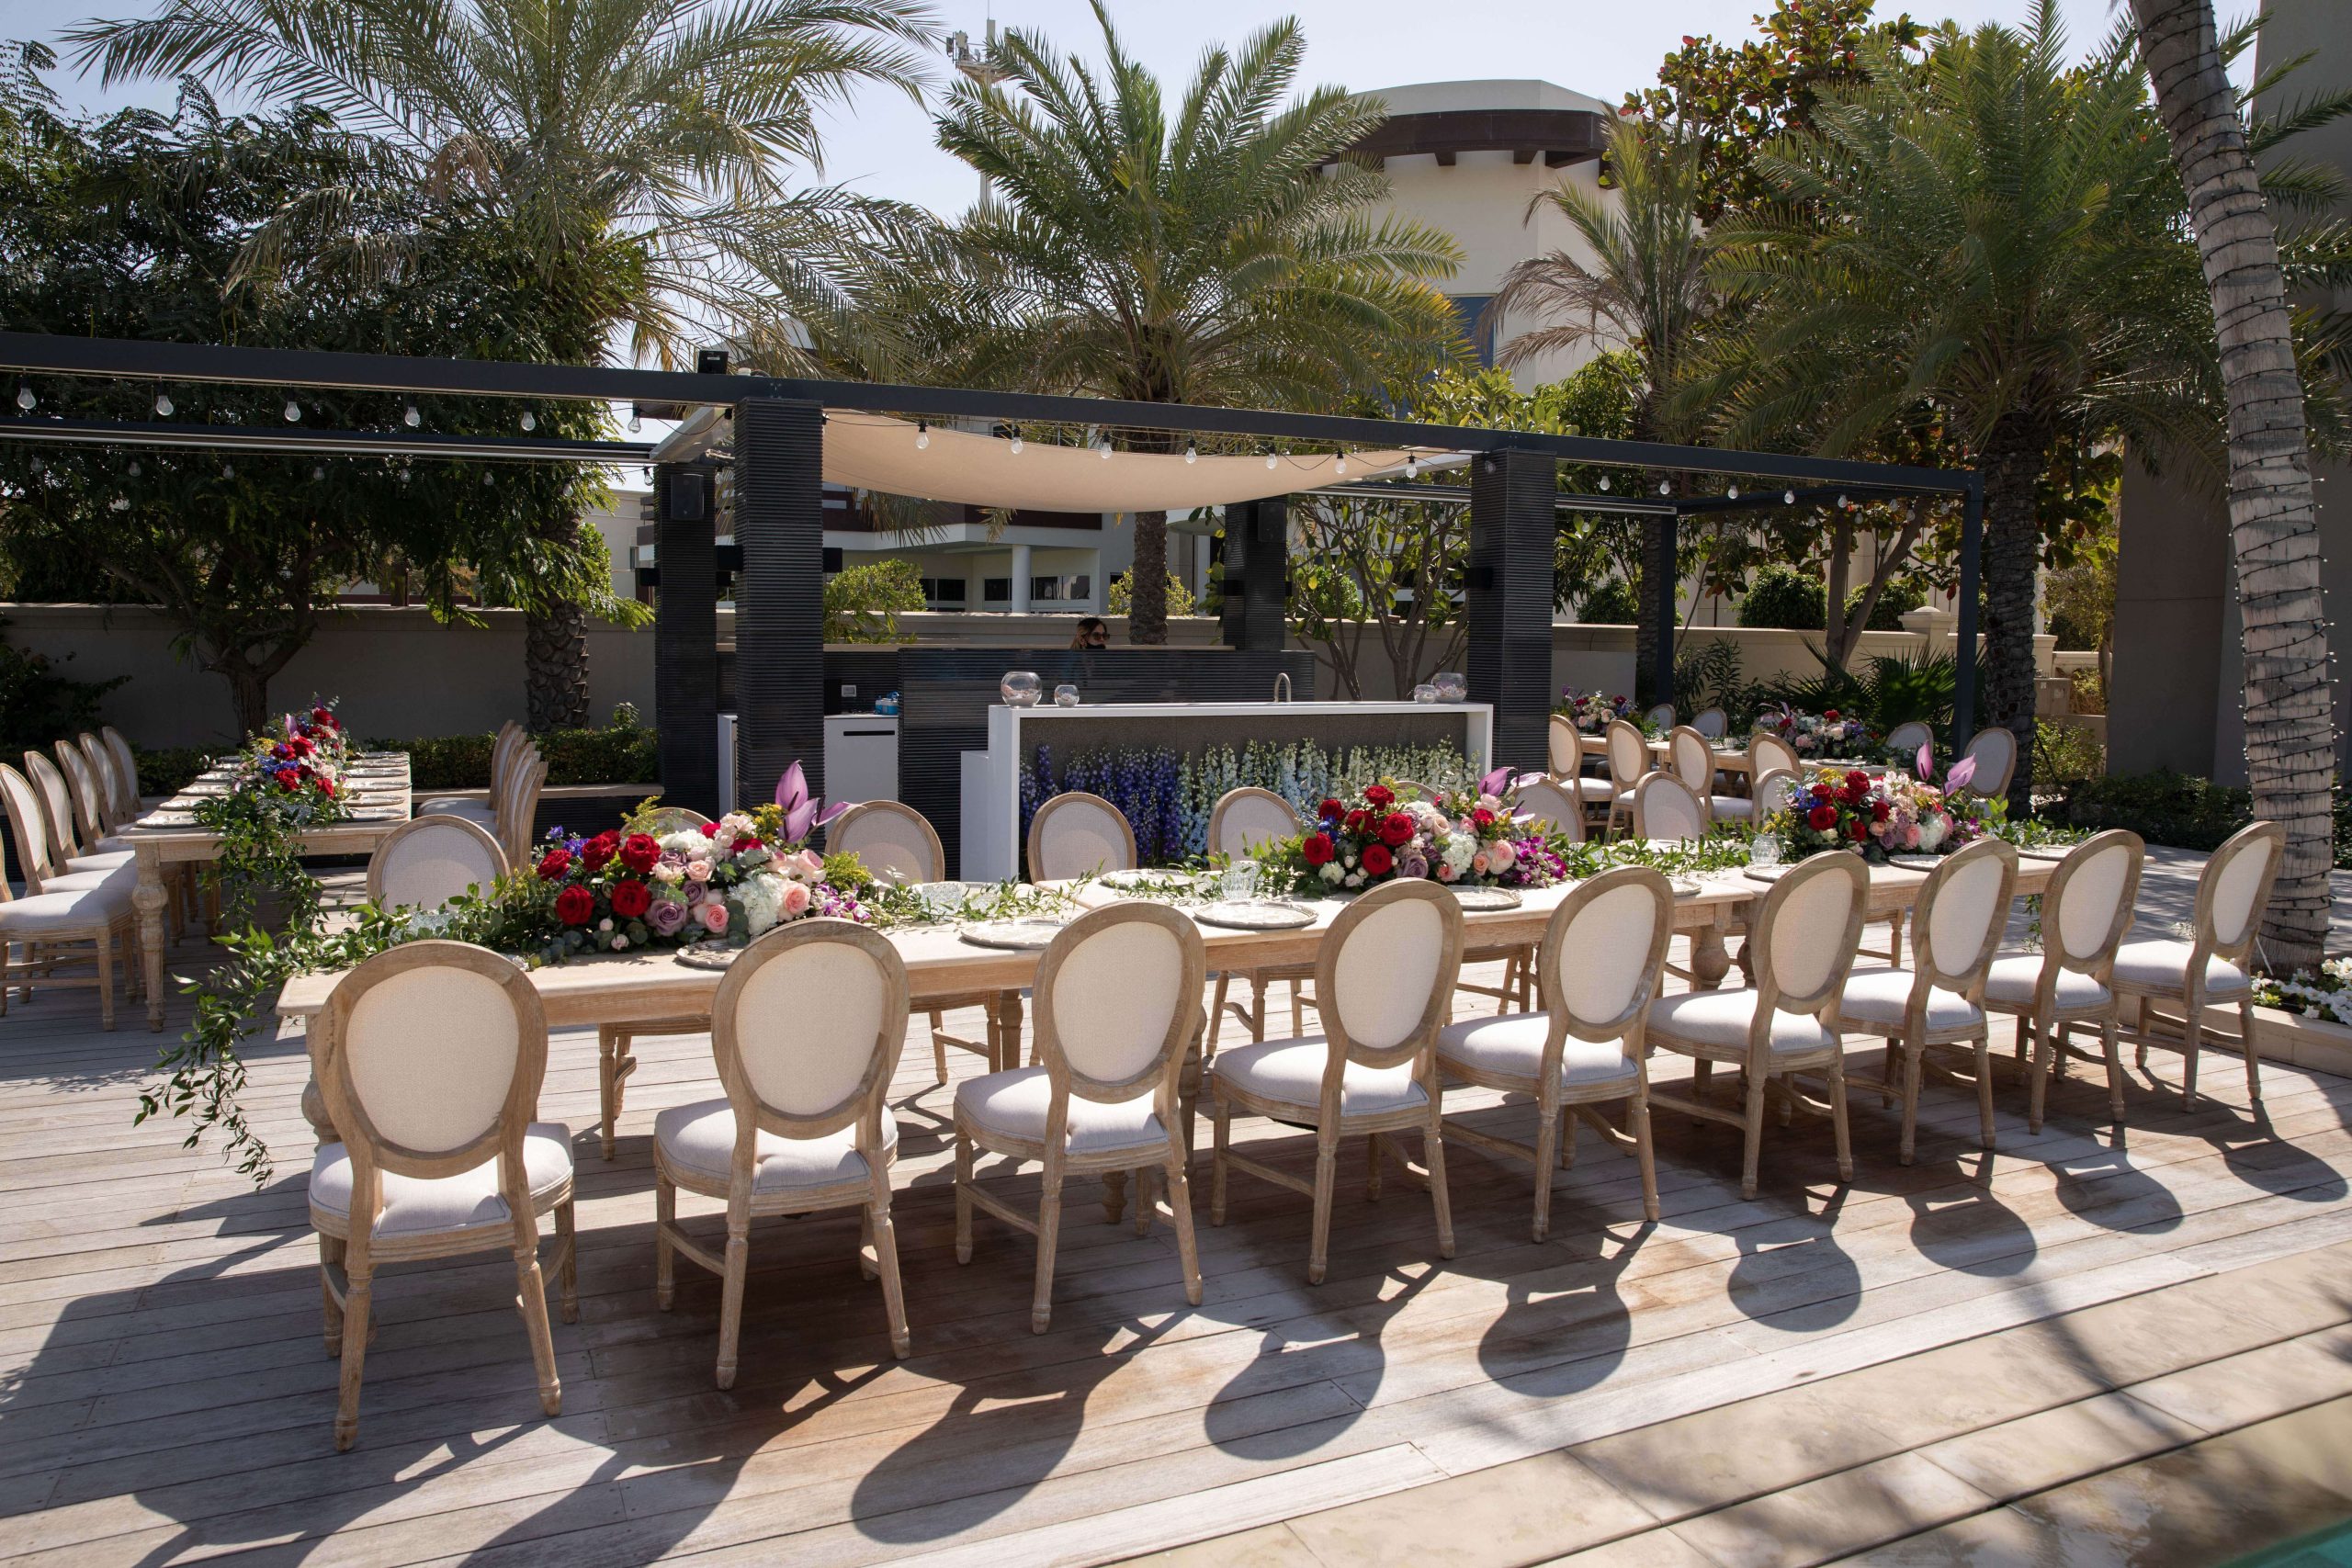 A stunning wedding lunch set up in Dubai with beautiful floral arrangements.